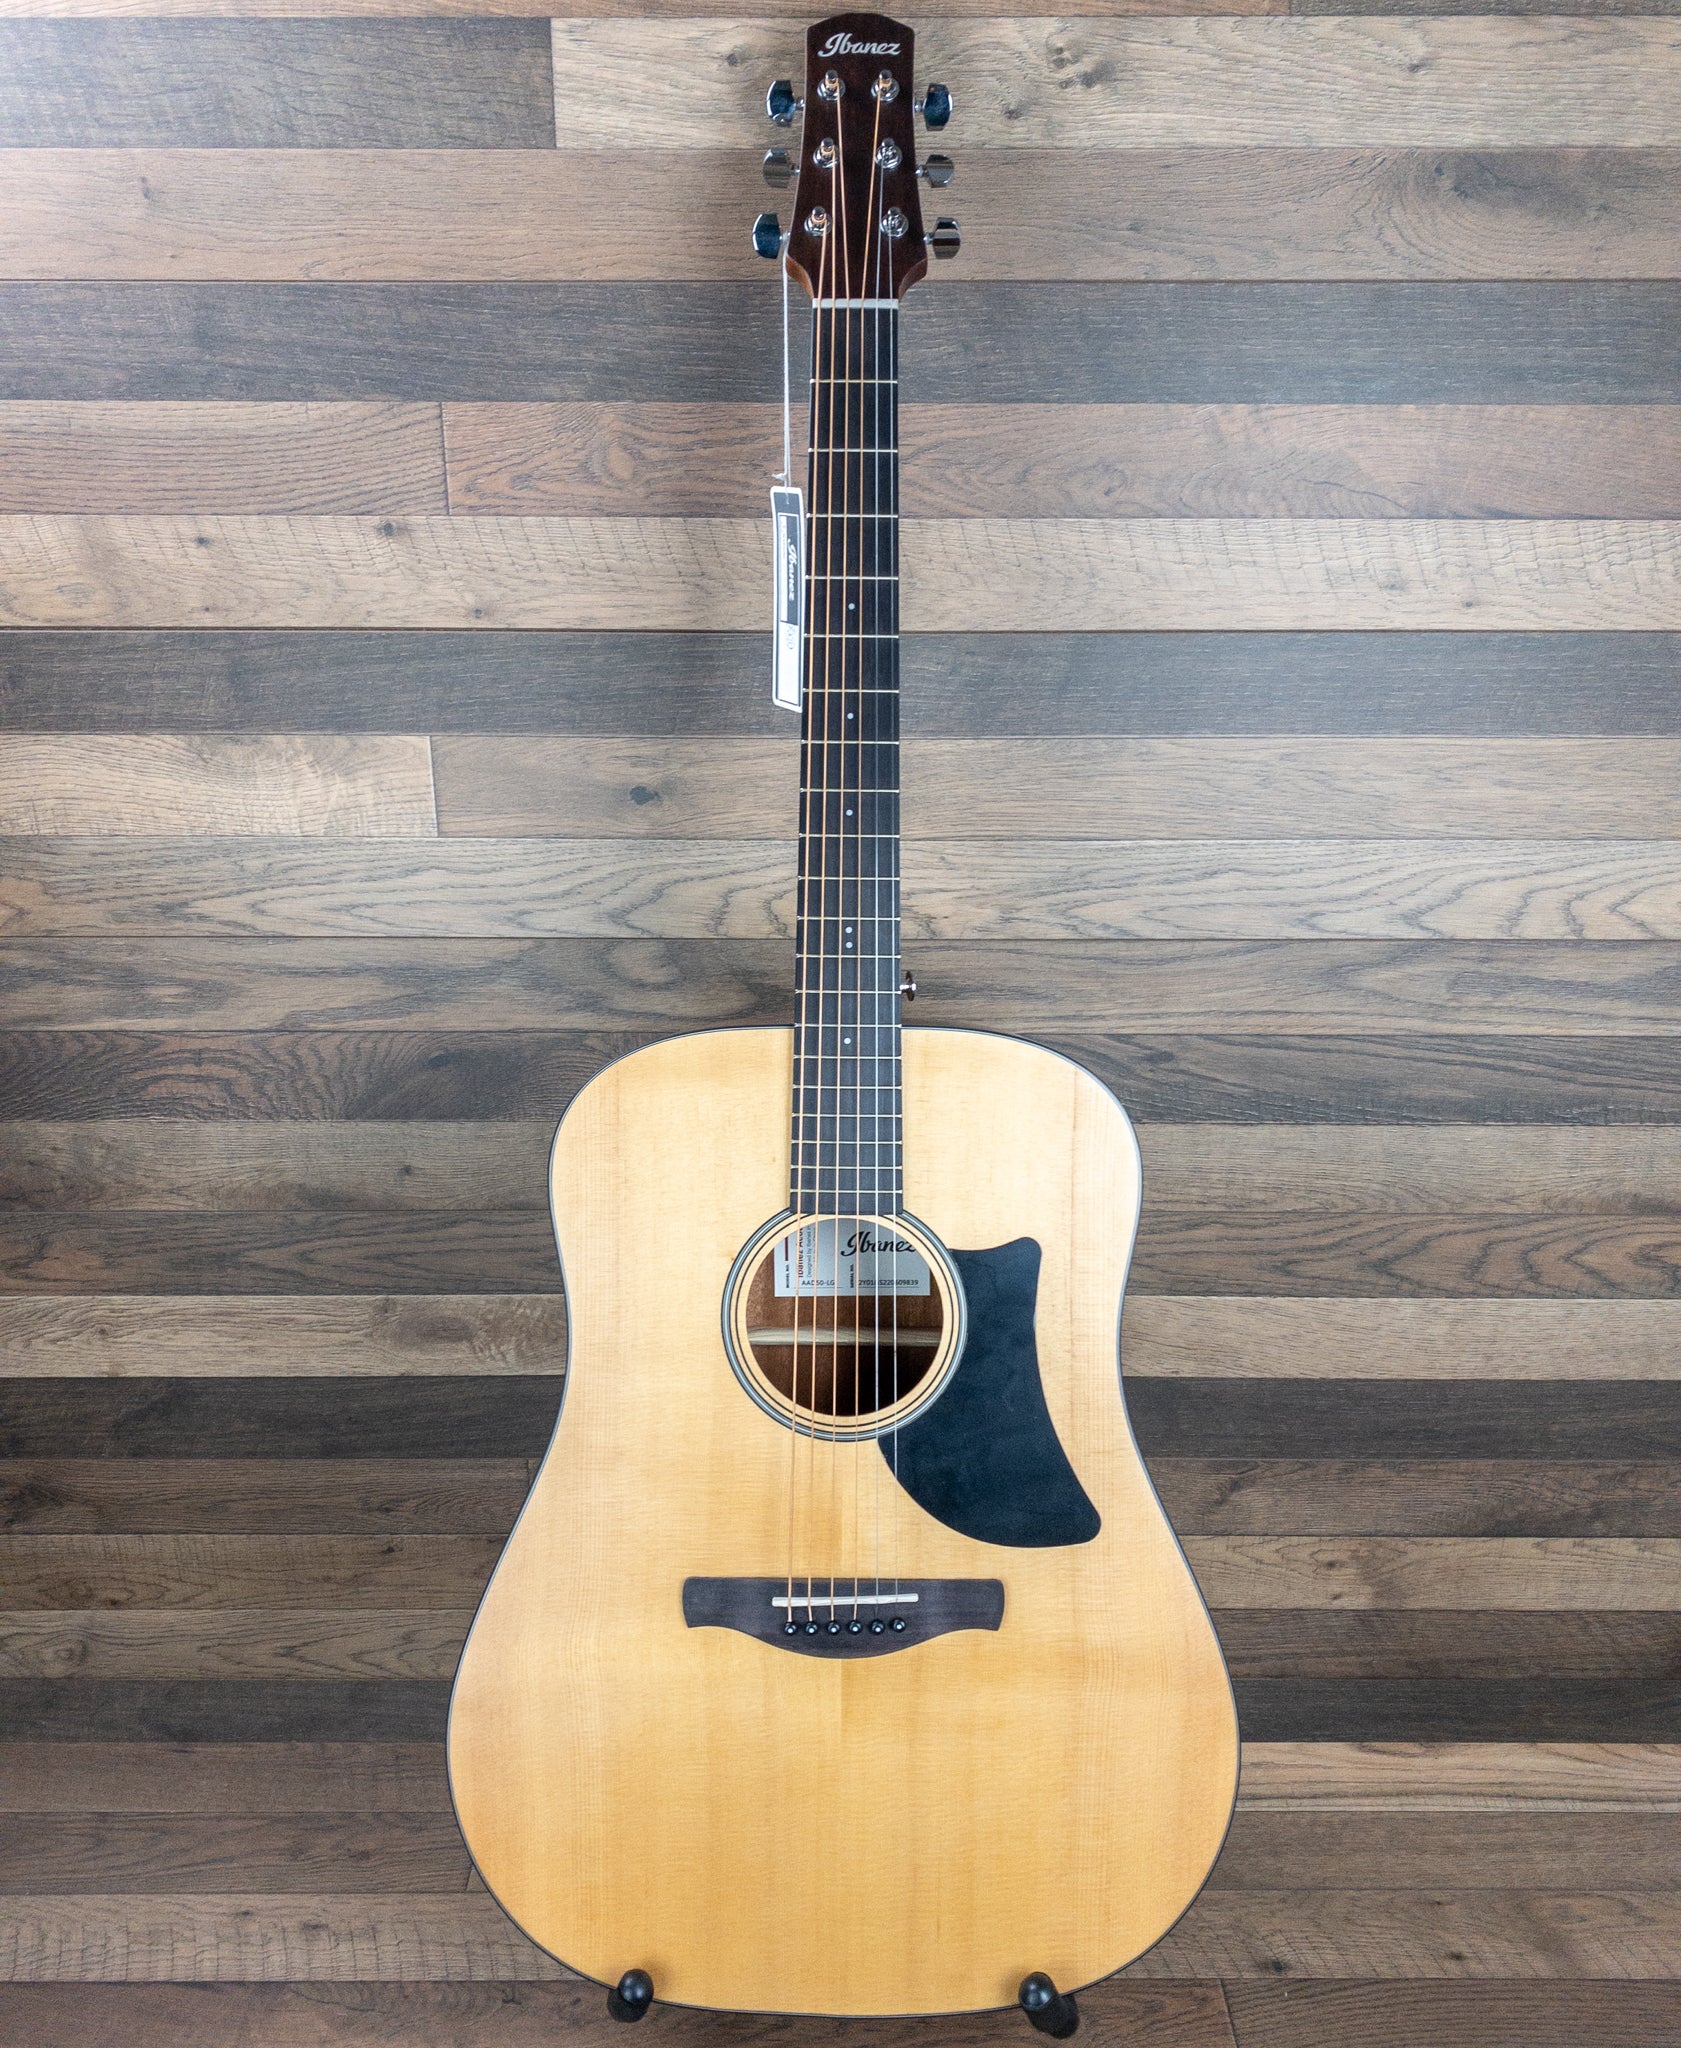 Ibanez AAD50LG Acoustic Guitar Advanced Acoustic Series Natural Low Gloss Finish